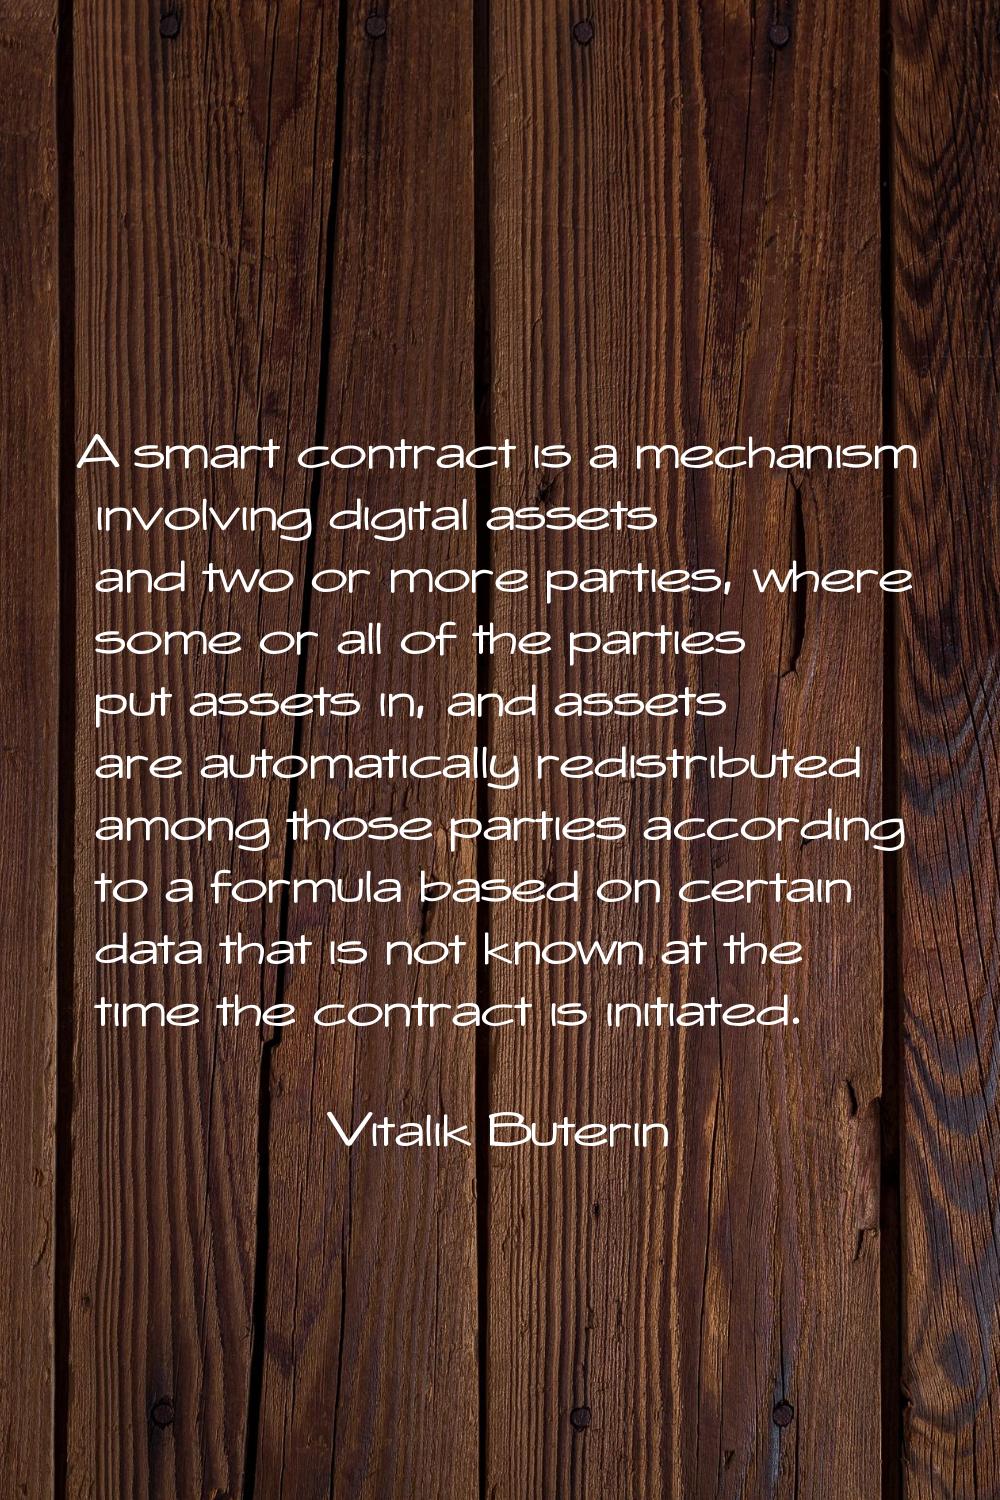 A smart contract is a mechanism involving digital assets and two or more parties, where some or all